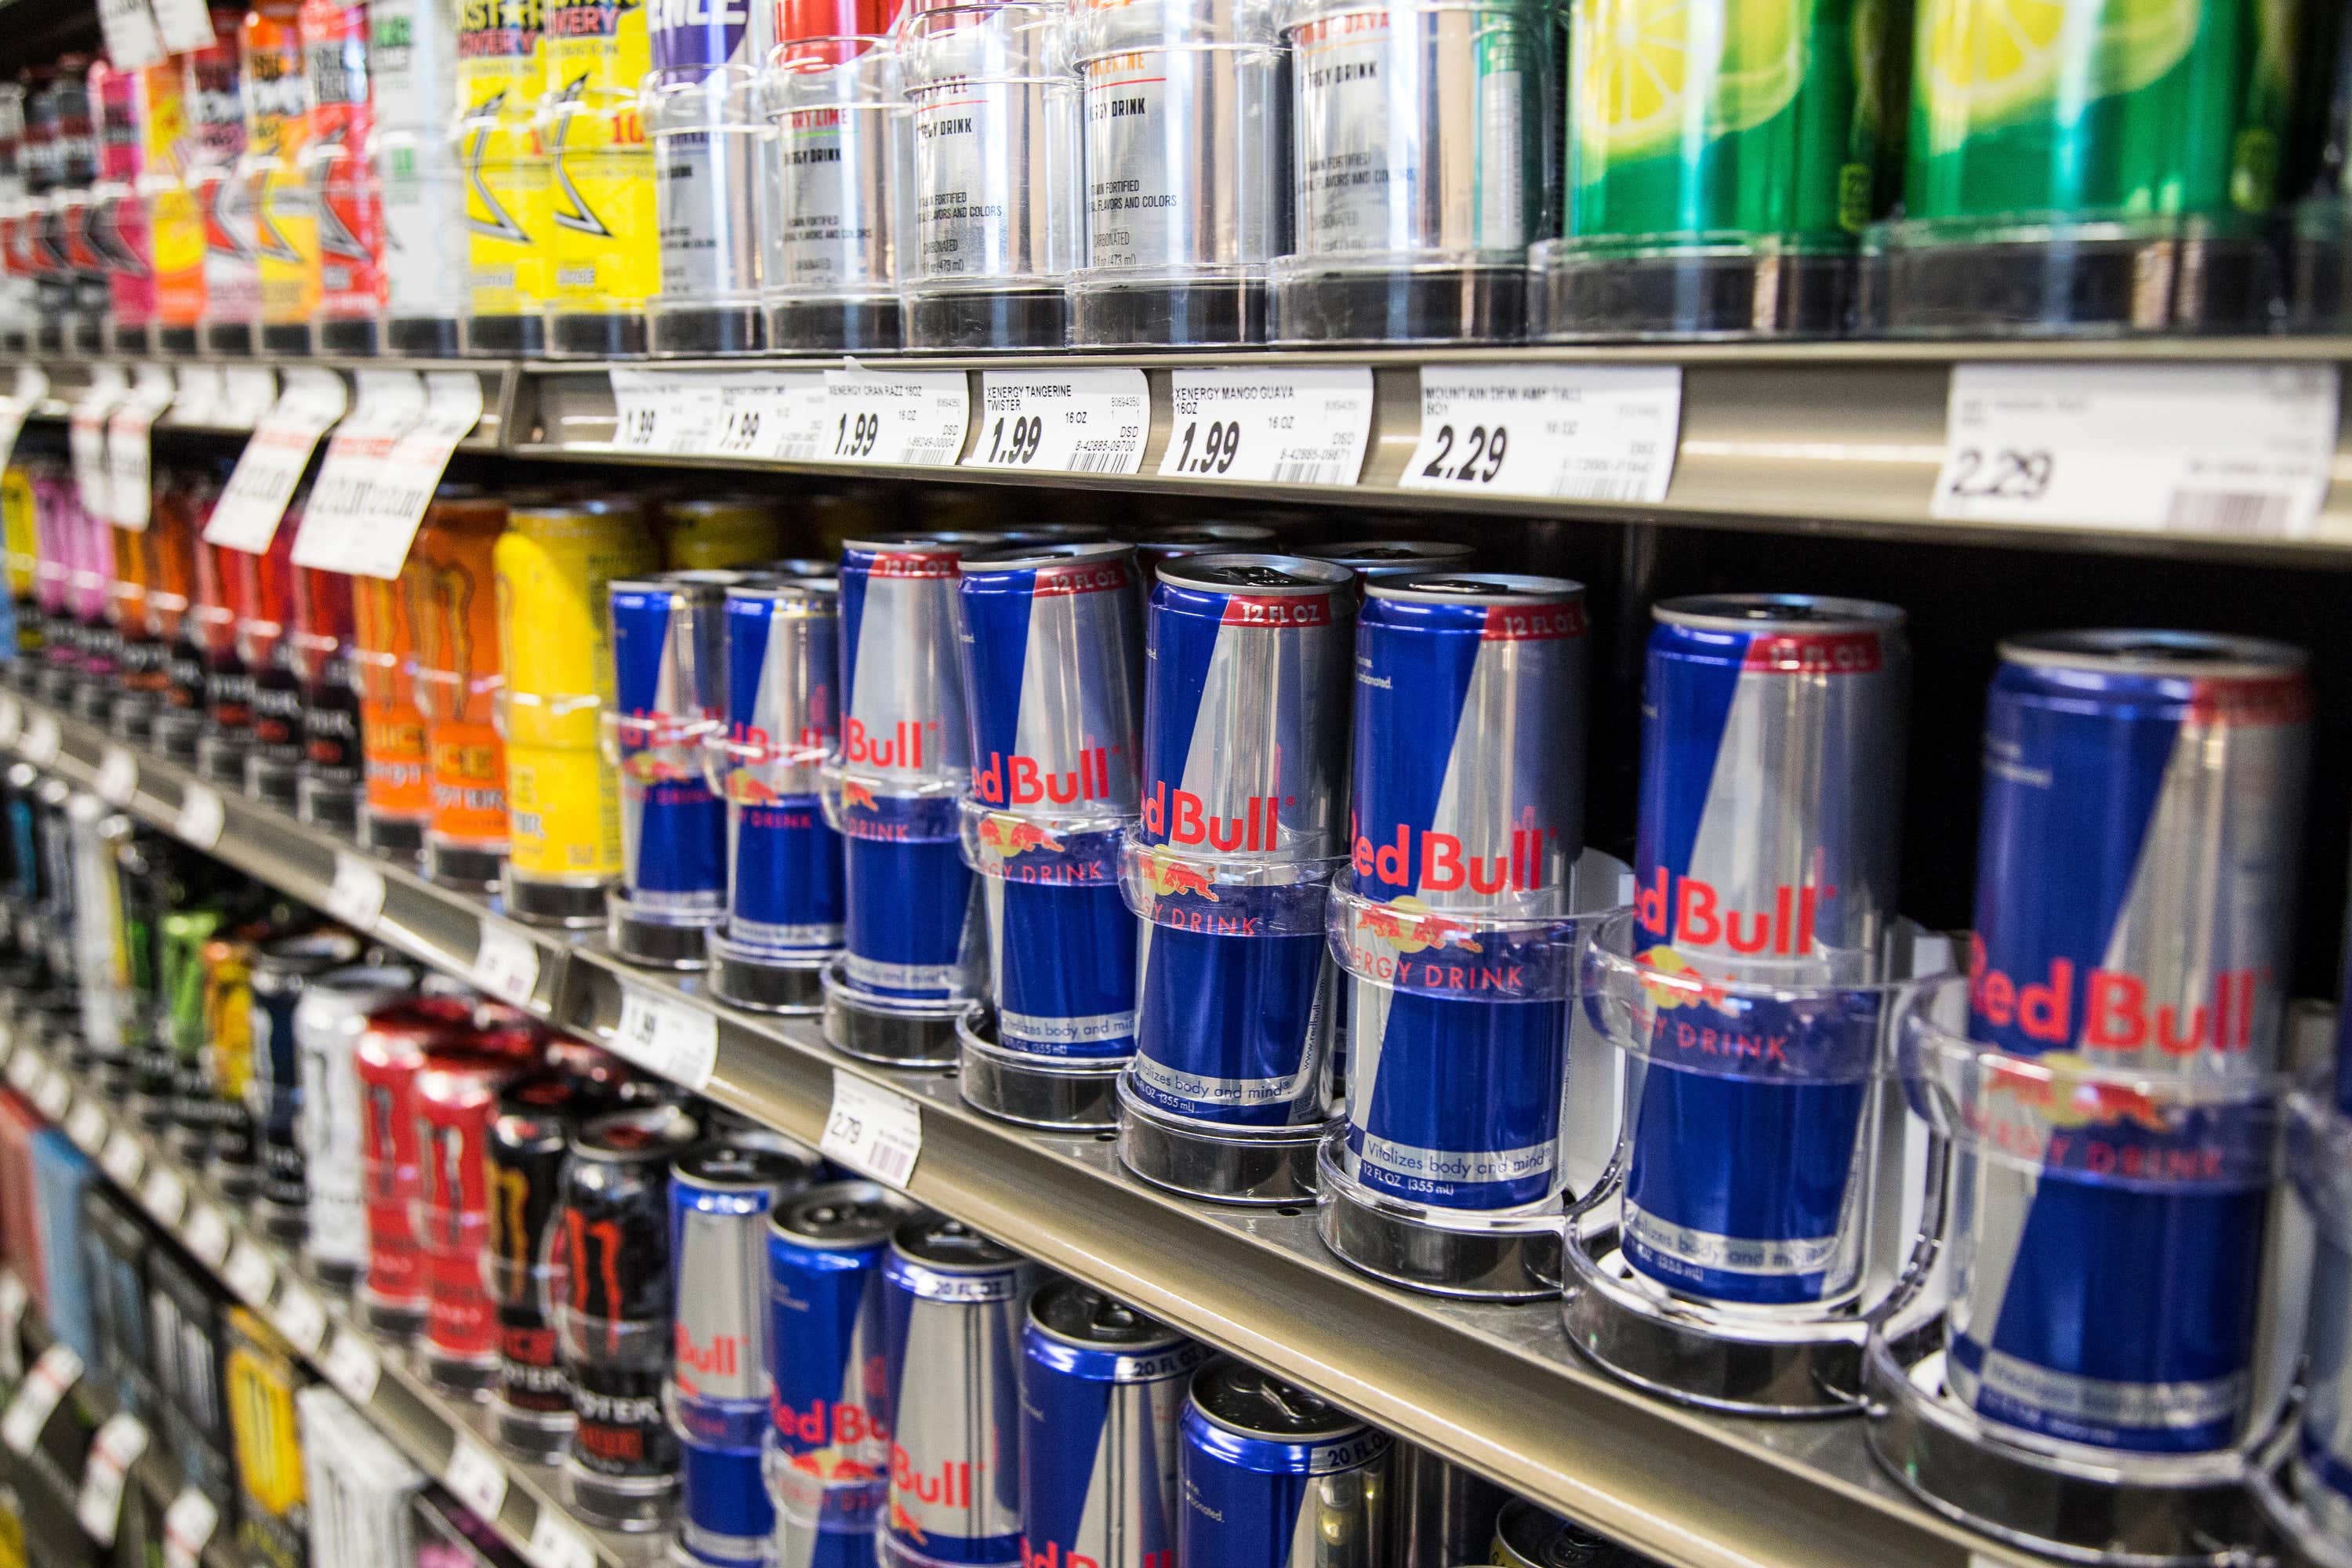 Energy drinks are often marketed at teenagers